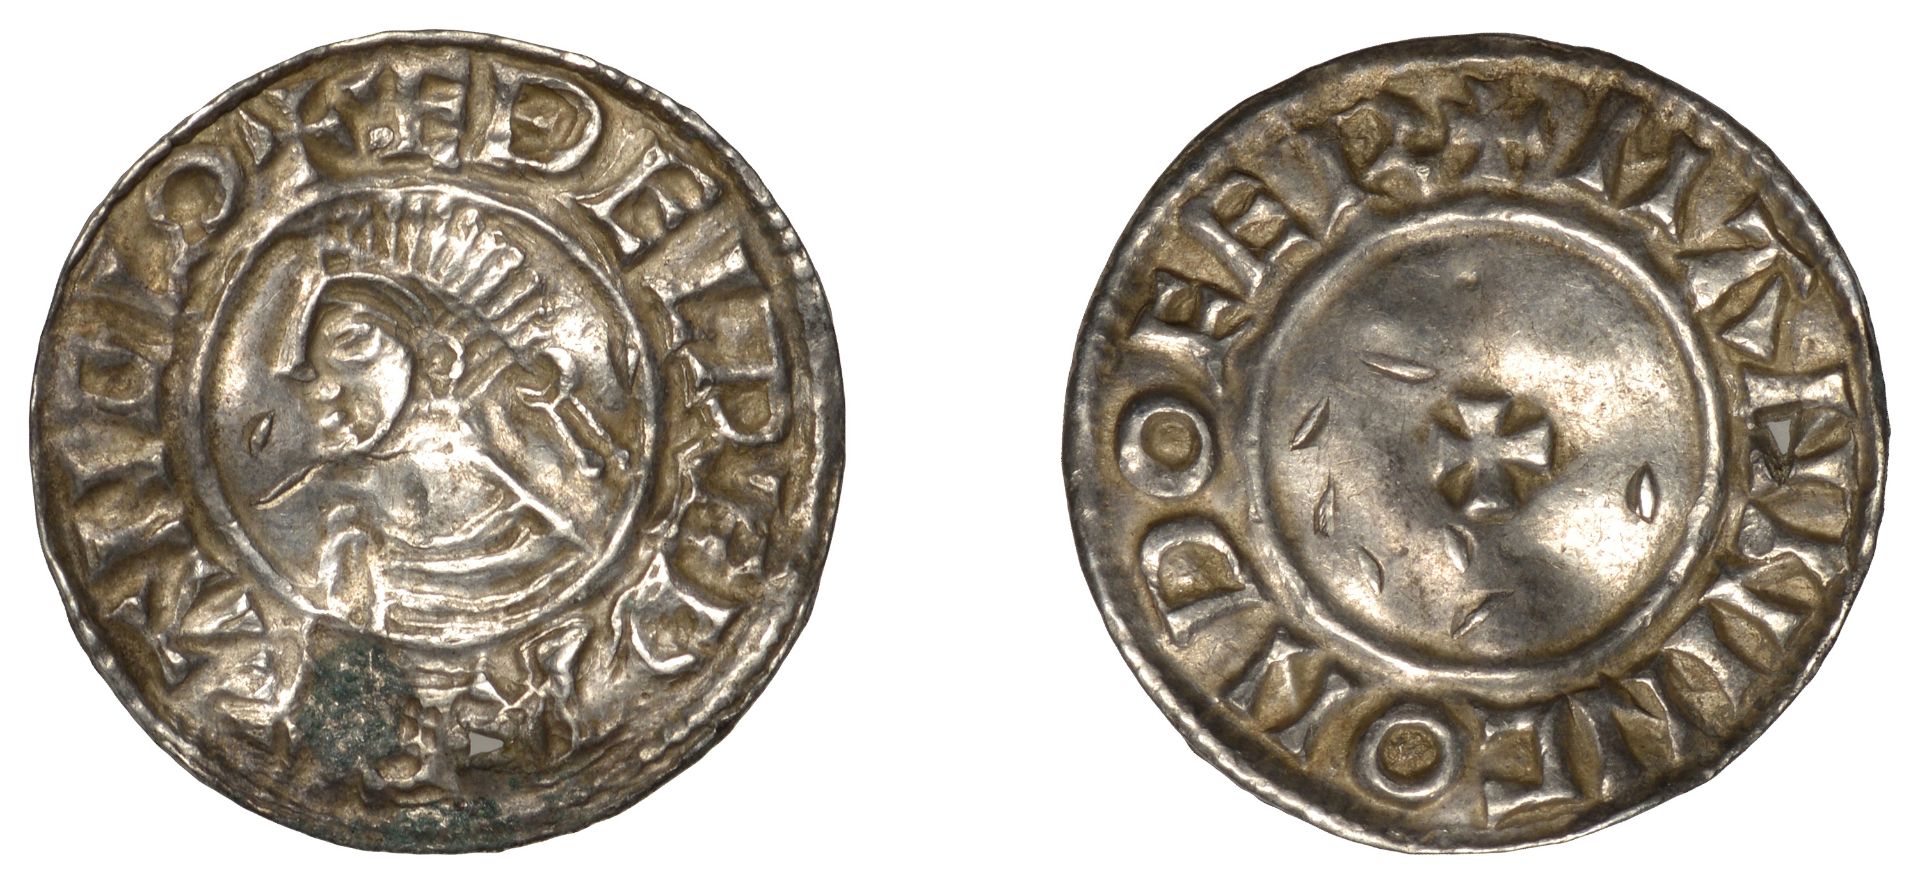 Ã†thelred II (978-1016), Penny, Last Small Cross type, Dover, Manning, manninc on dofer, Lond...